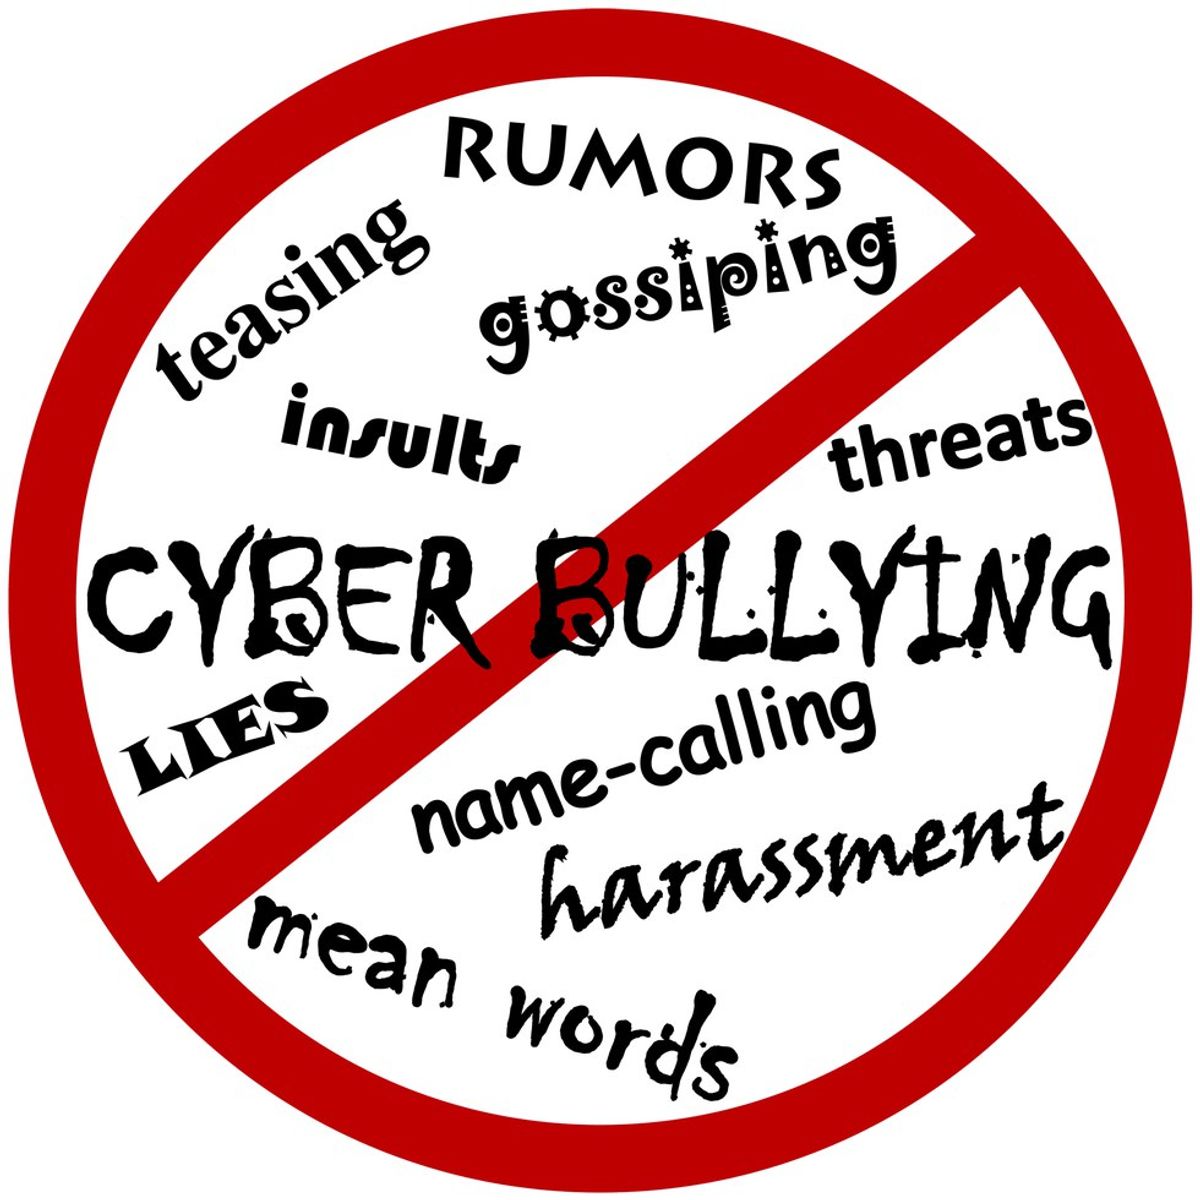 Why We Need To Start Paying Attention To Cyber Bullying More